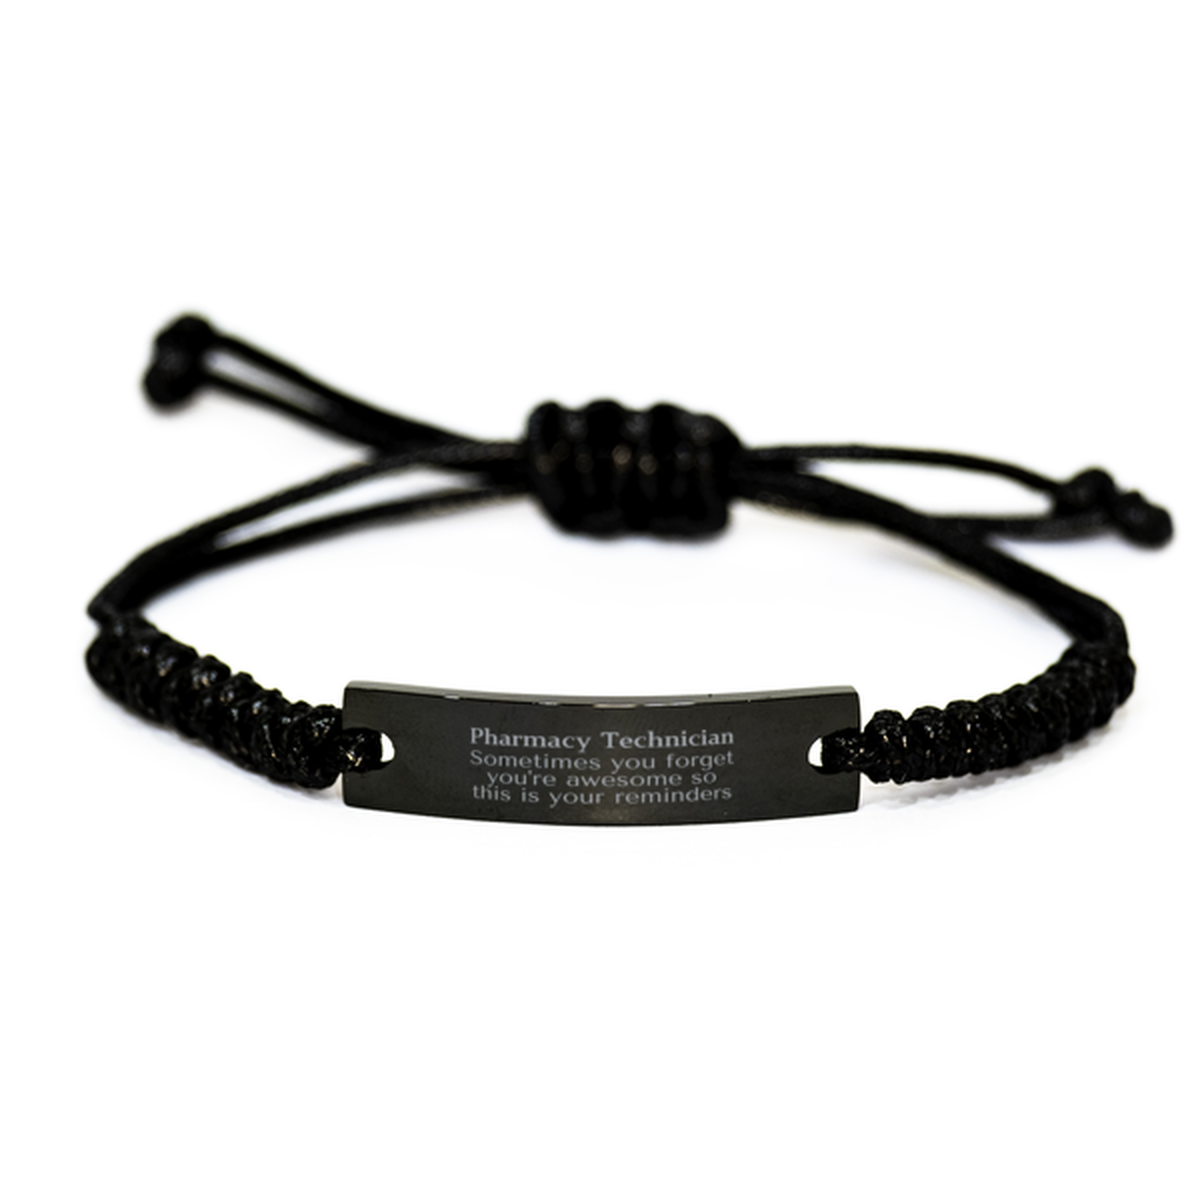 Sentimental Pharmacy Technician Black Rope Bracelet, Pharmacy Technician Sometimes you forget you're awesome so this is your reminders, Graduation Christmas Birthday Gifts for Pharmacy Technician, Men, Women, Coworkers